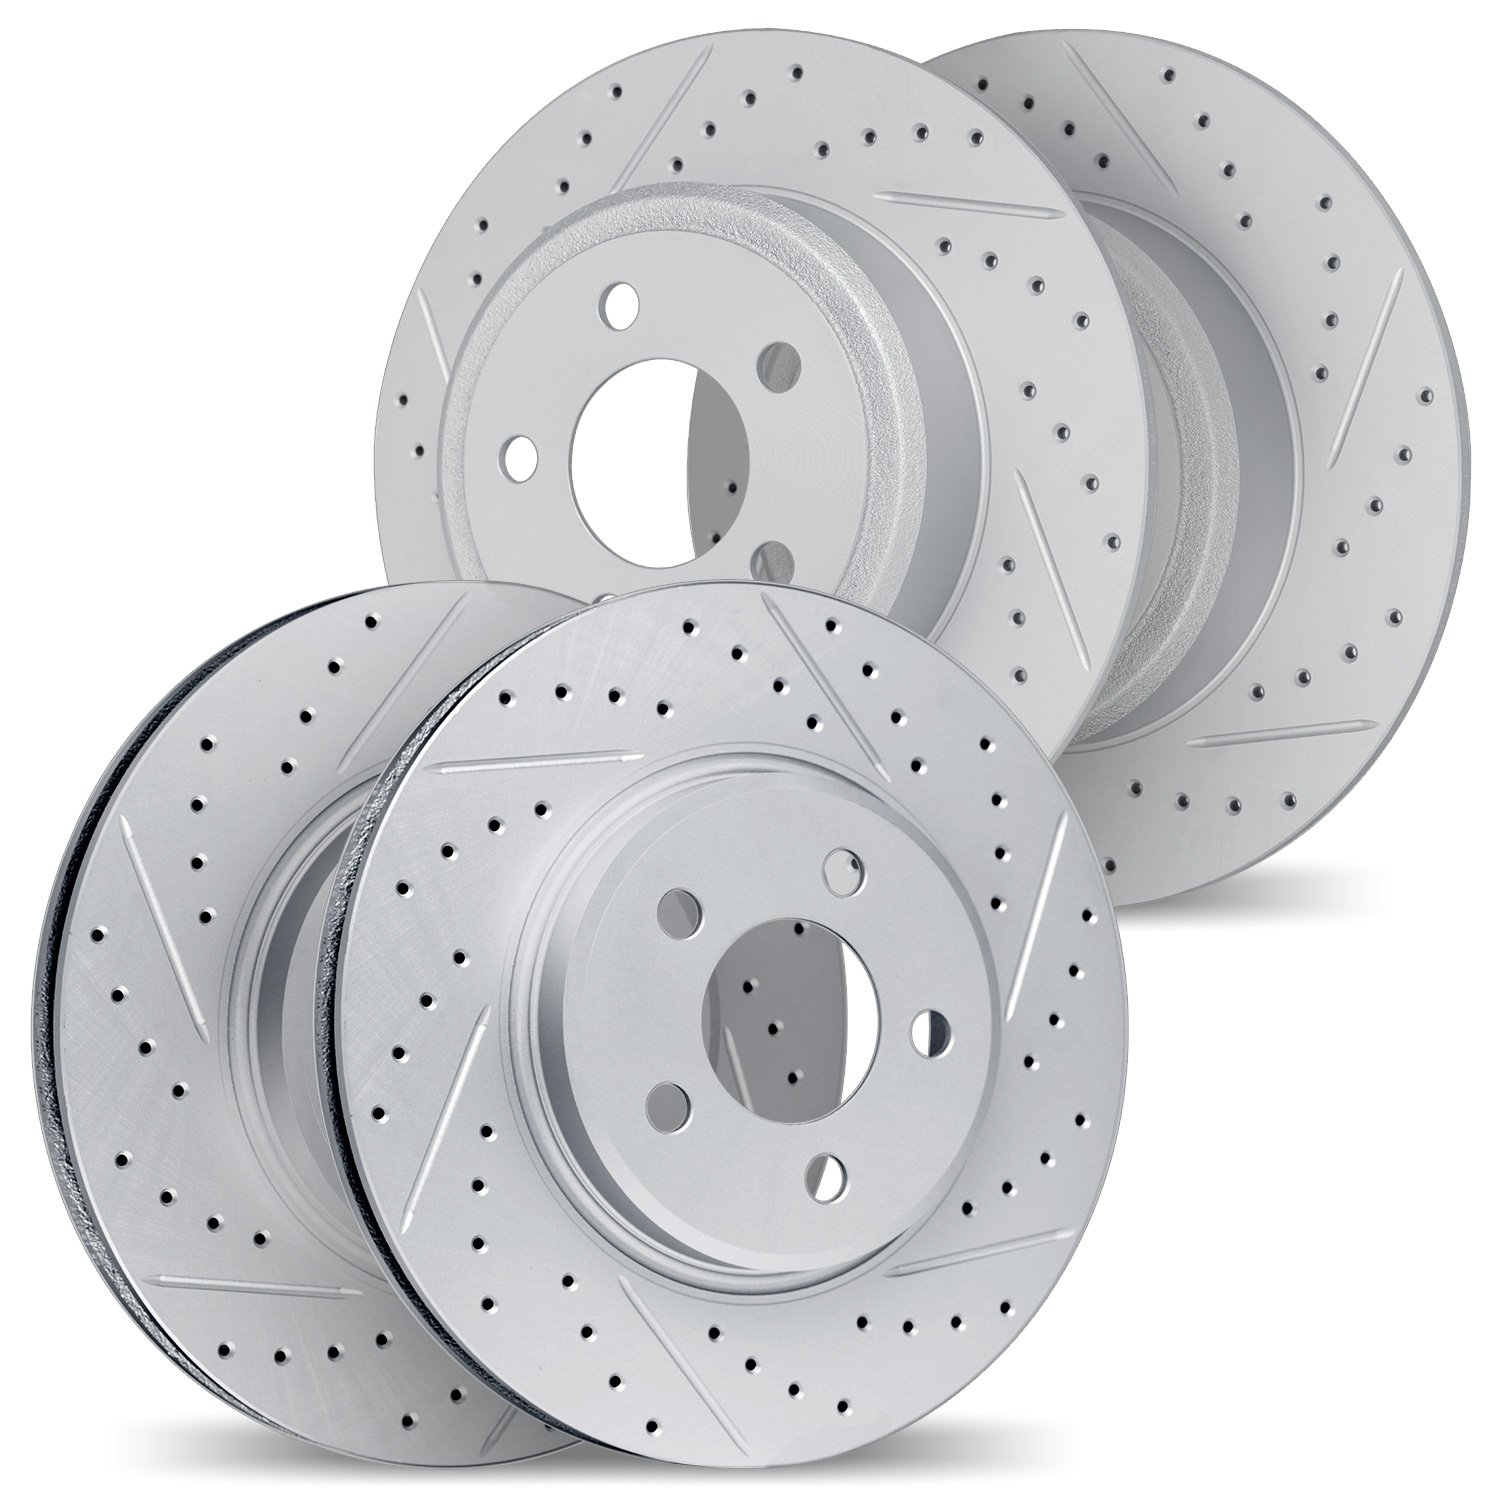 2004-03036 Geoperformance Drilled/Slotted Brake Rotors, 2001-2005 Kia/Hyundai/Genesis, Position: Front and Rear